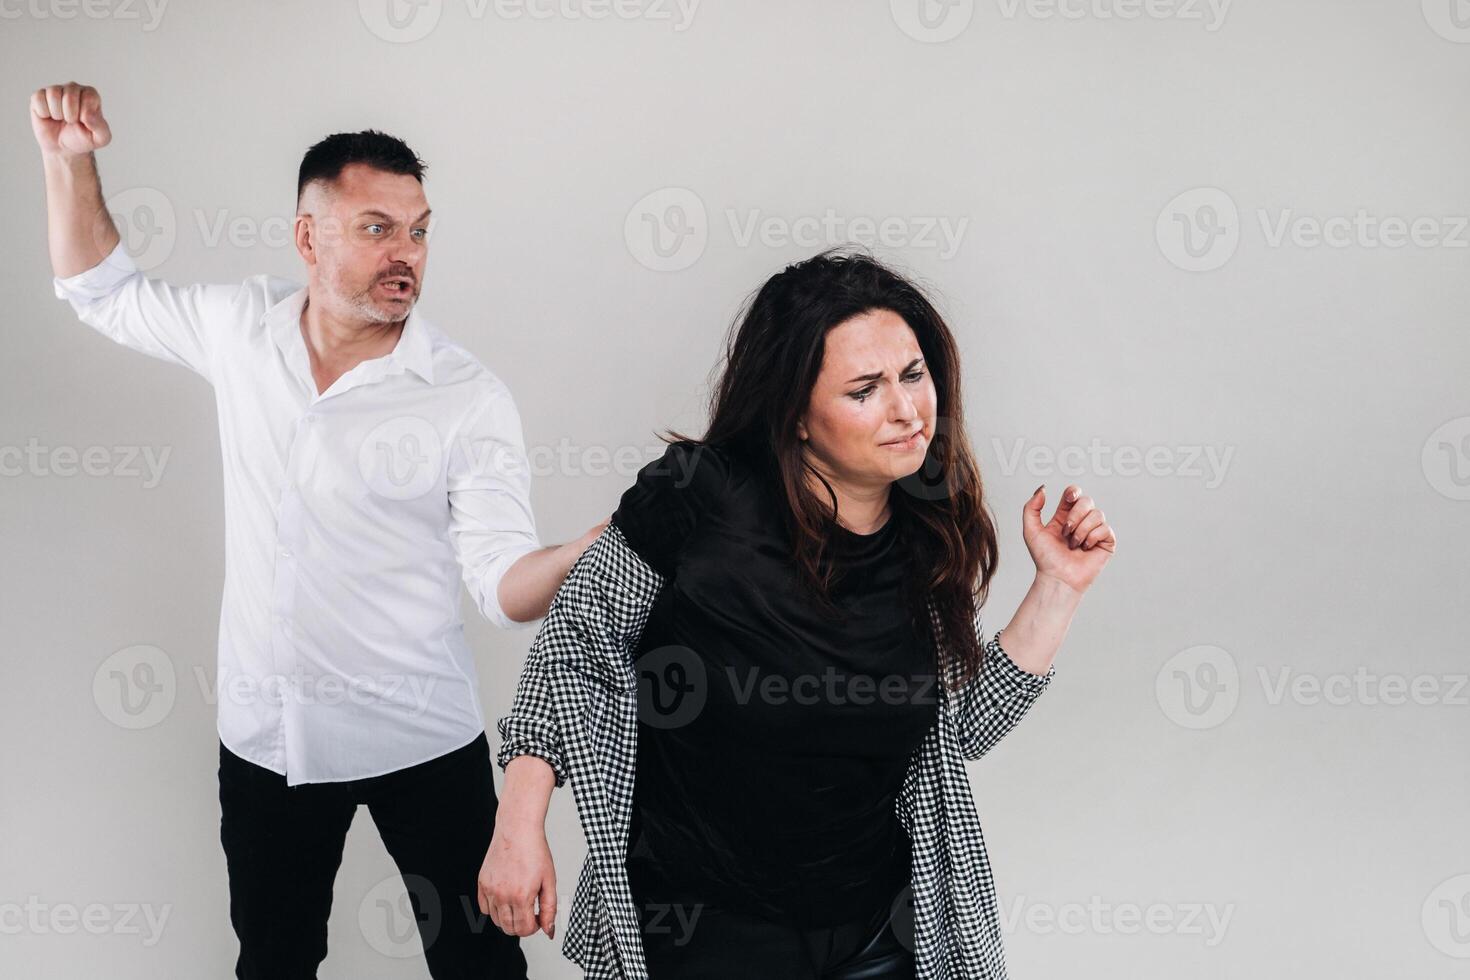 A man swings his hand at a battered woman standing on a gray background. Domestic violence photo